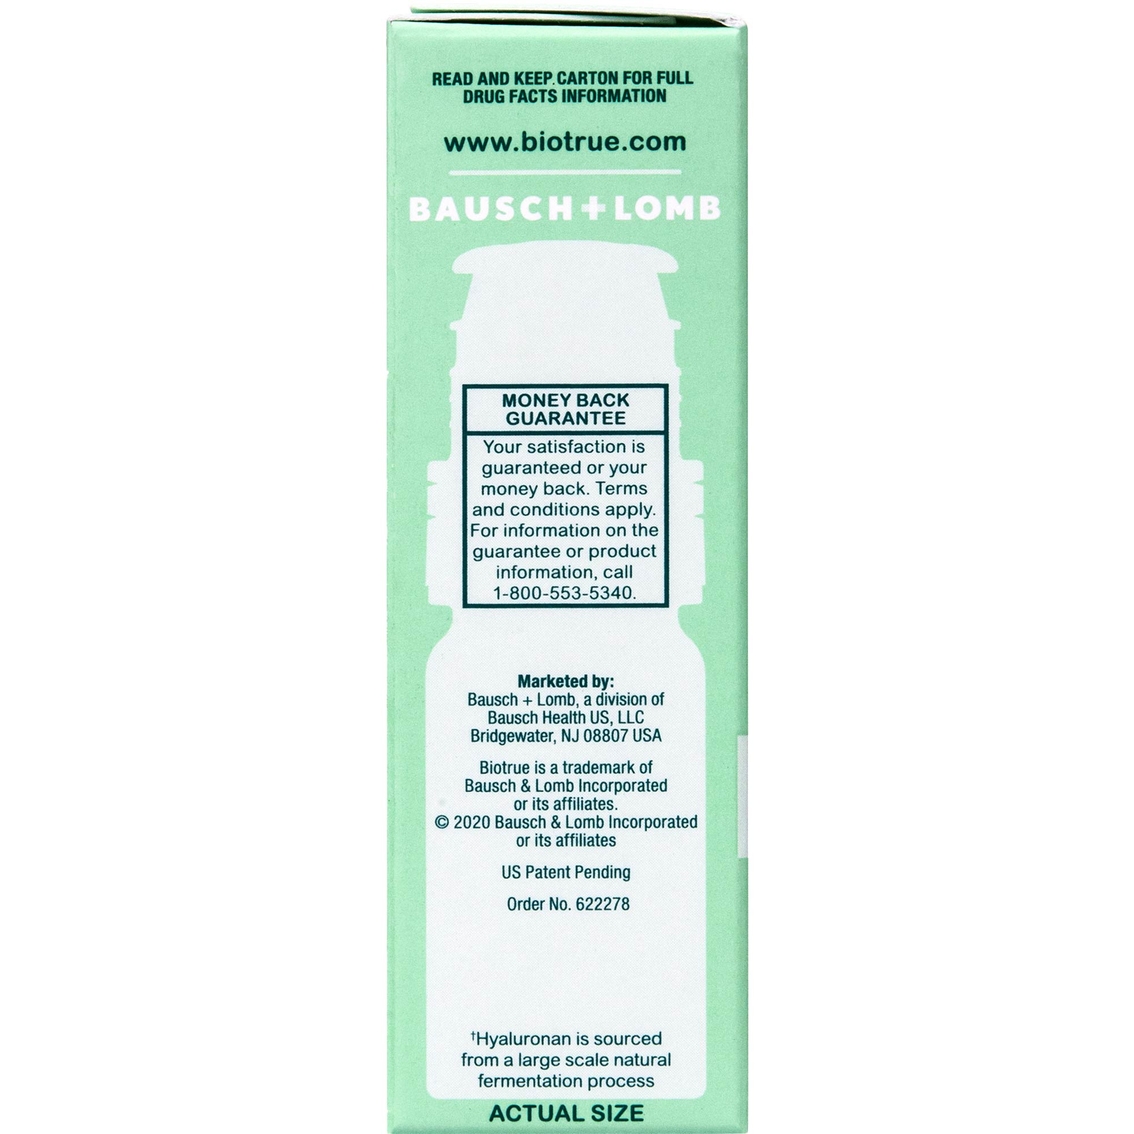 Bausch & Lomb Biotrue Hydration Boost for Dry Eyes 10ml - Image 5 of 6